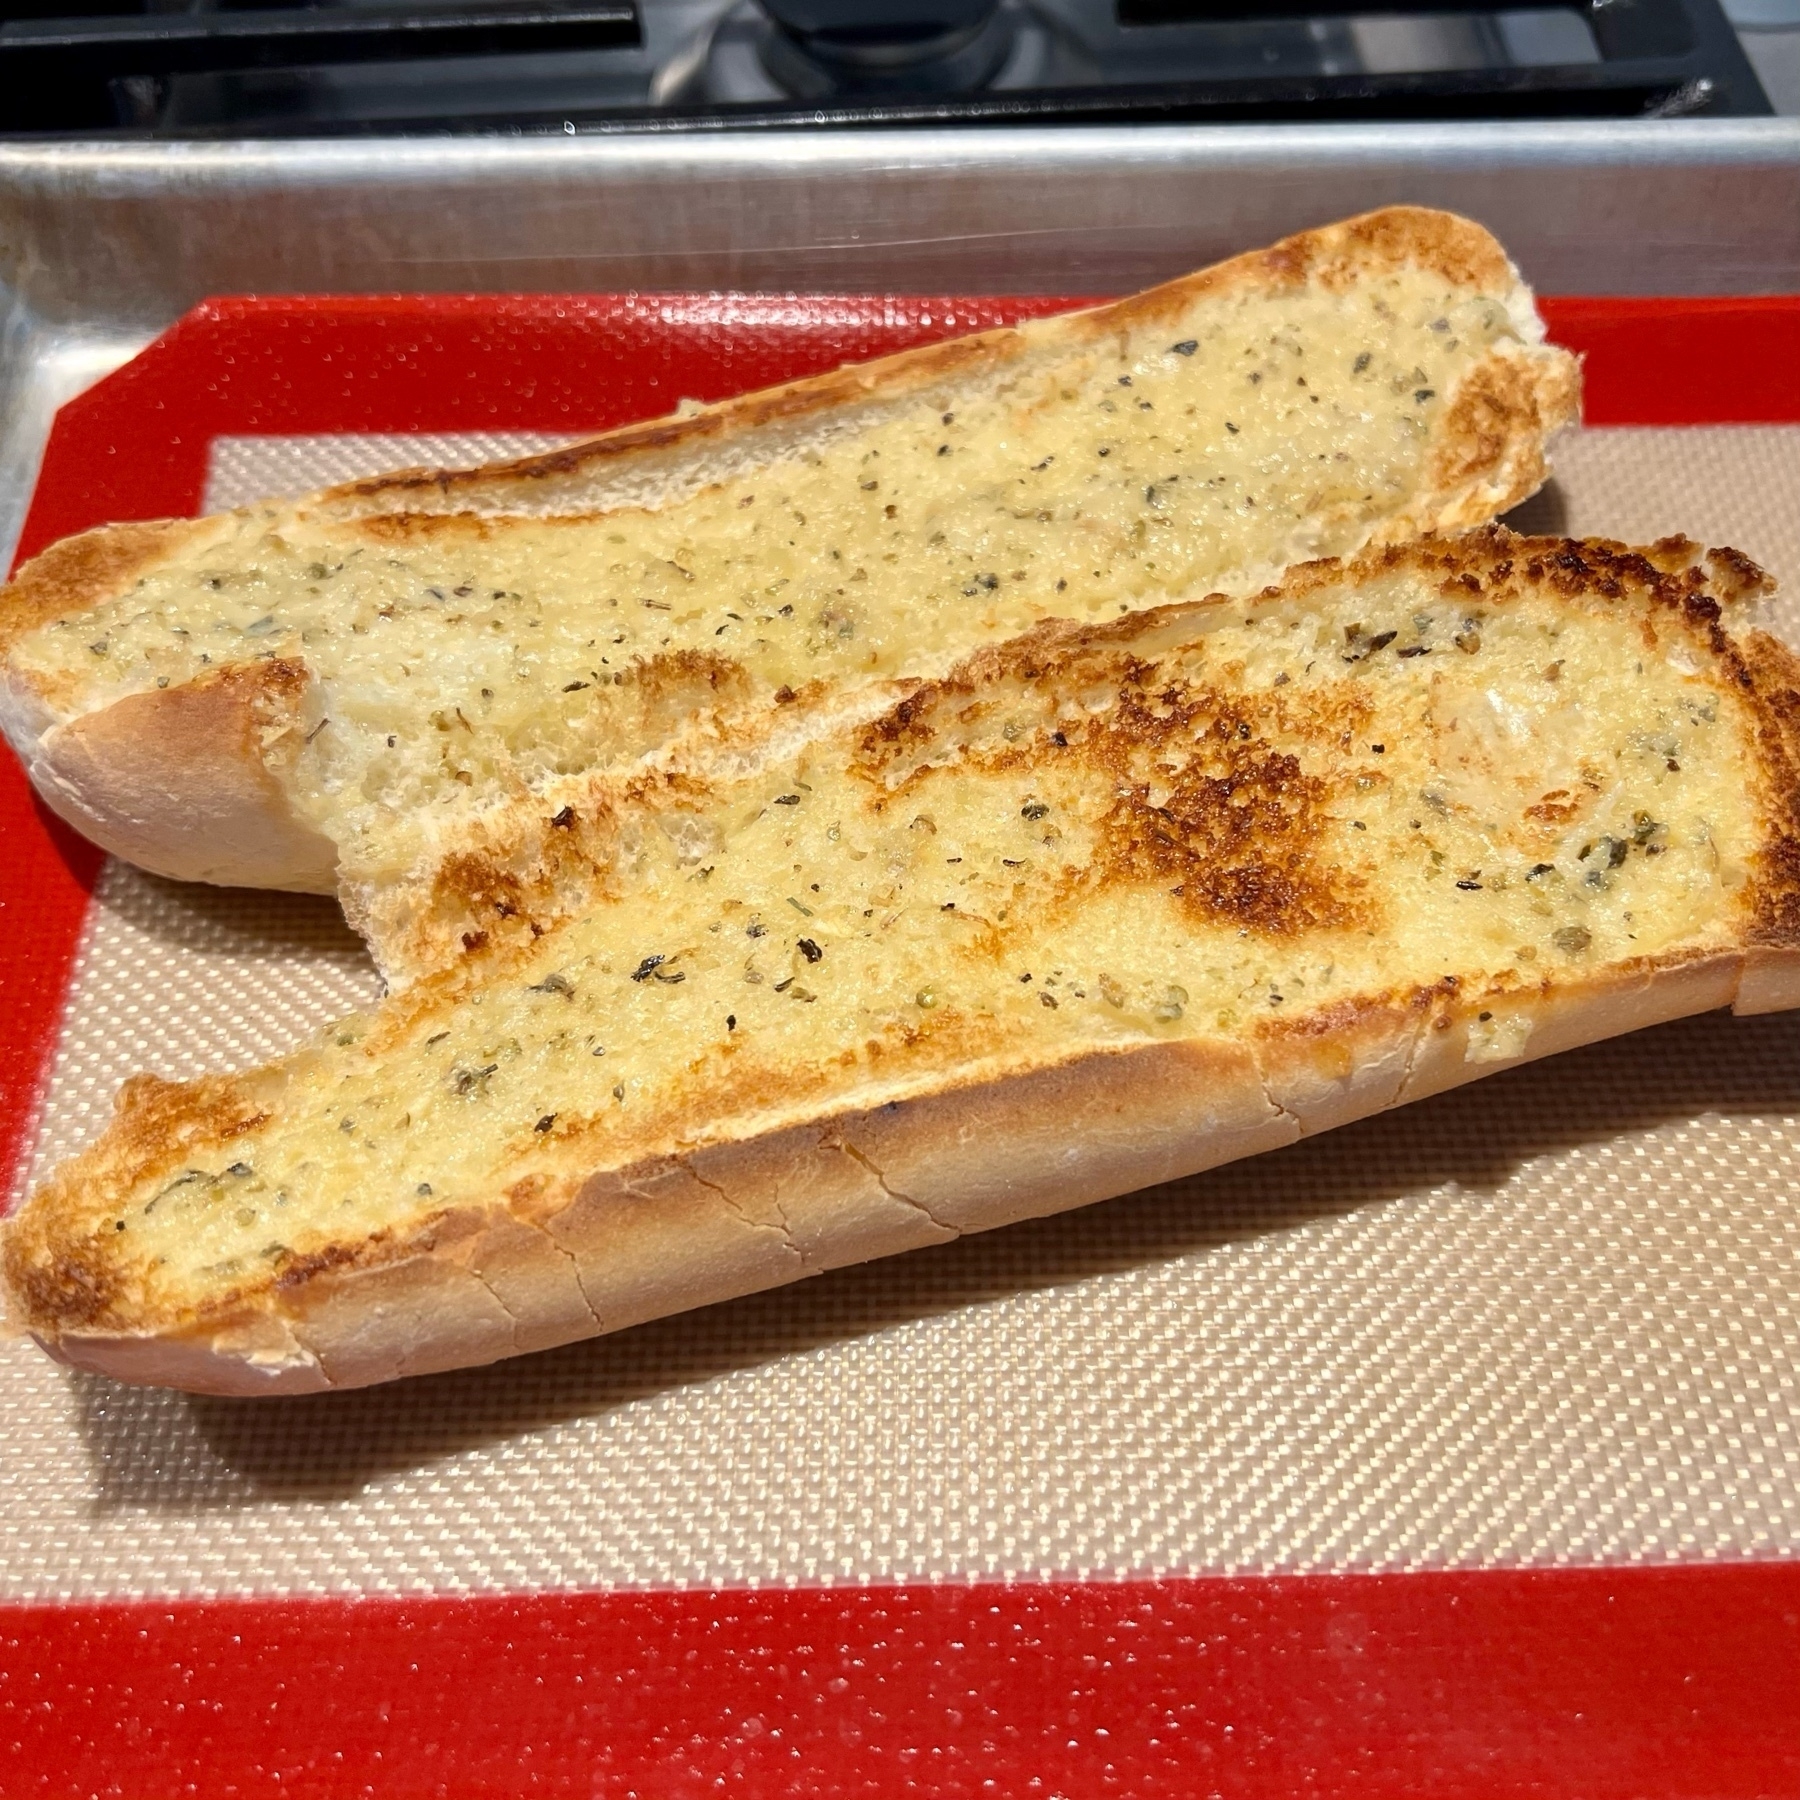 Garlic bread on a red and beige sil pad and quarter sheet.